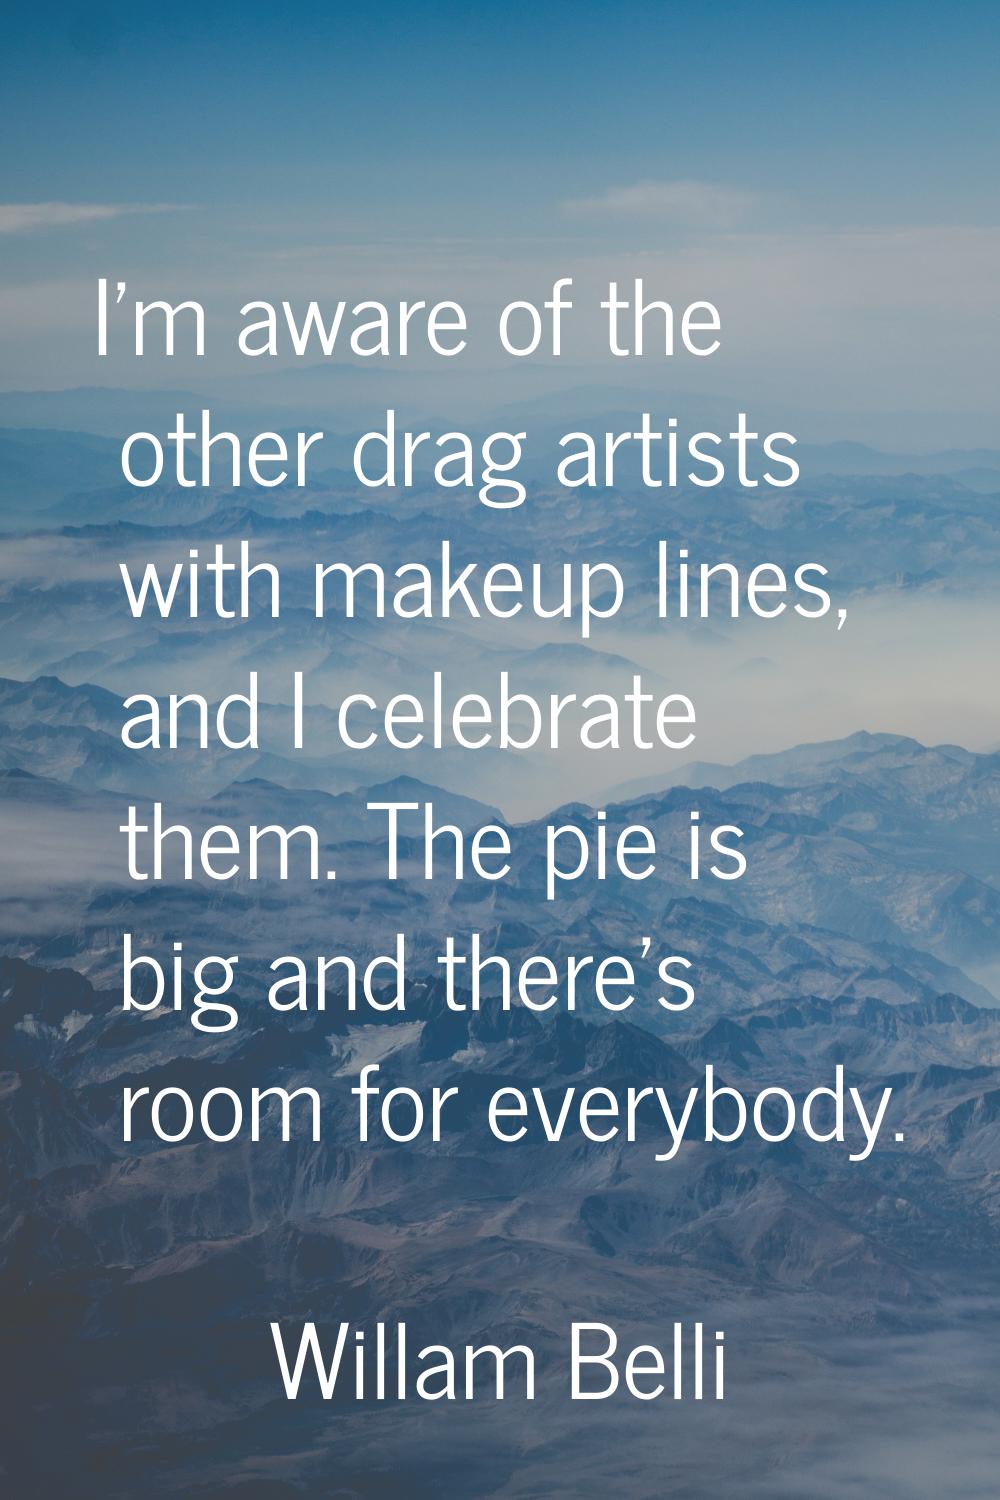 I'm aware of the other drag artists with makeup lines, and I celebrate them. The pie is big and the